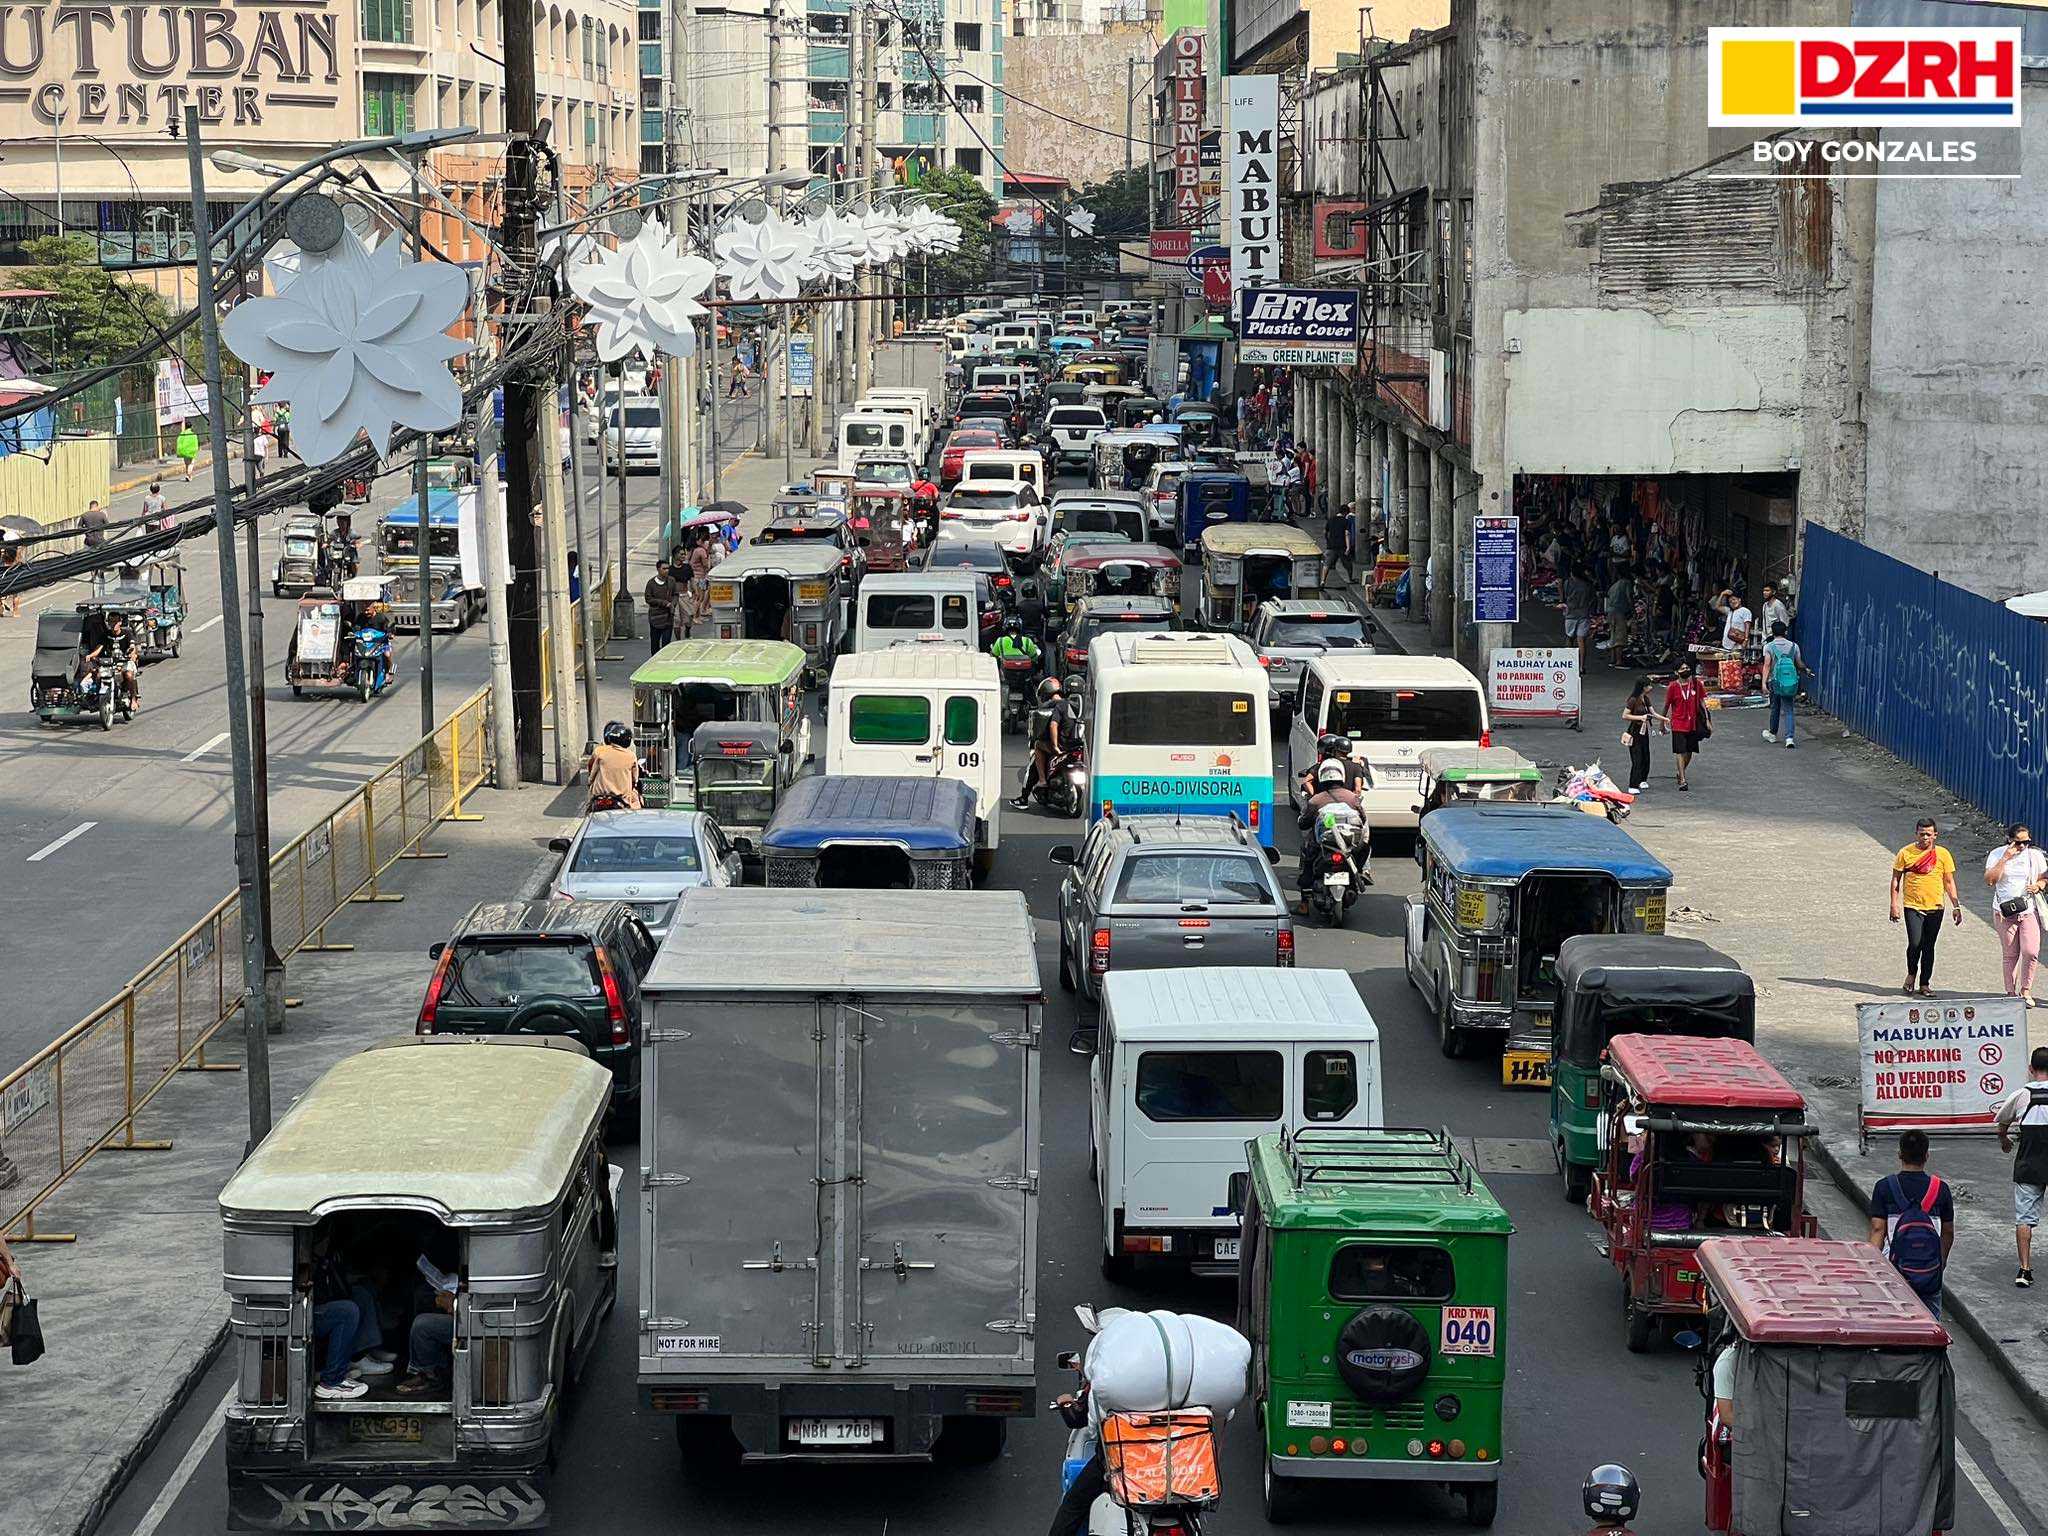 DOTr remains firm on Dec. 31 consolidation deadline for PUVs